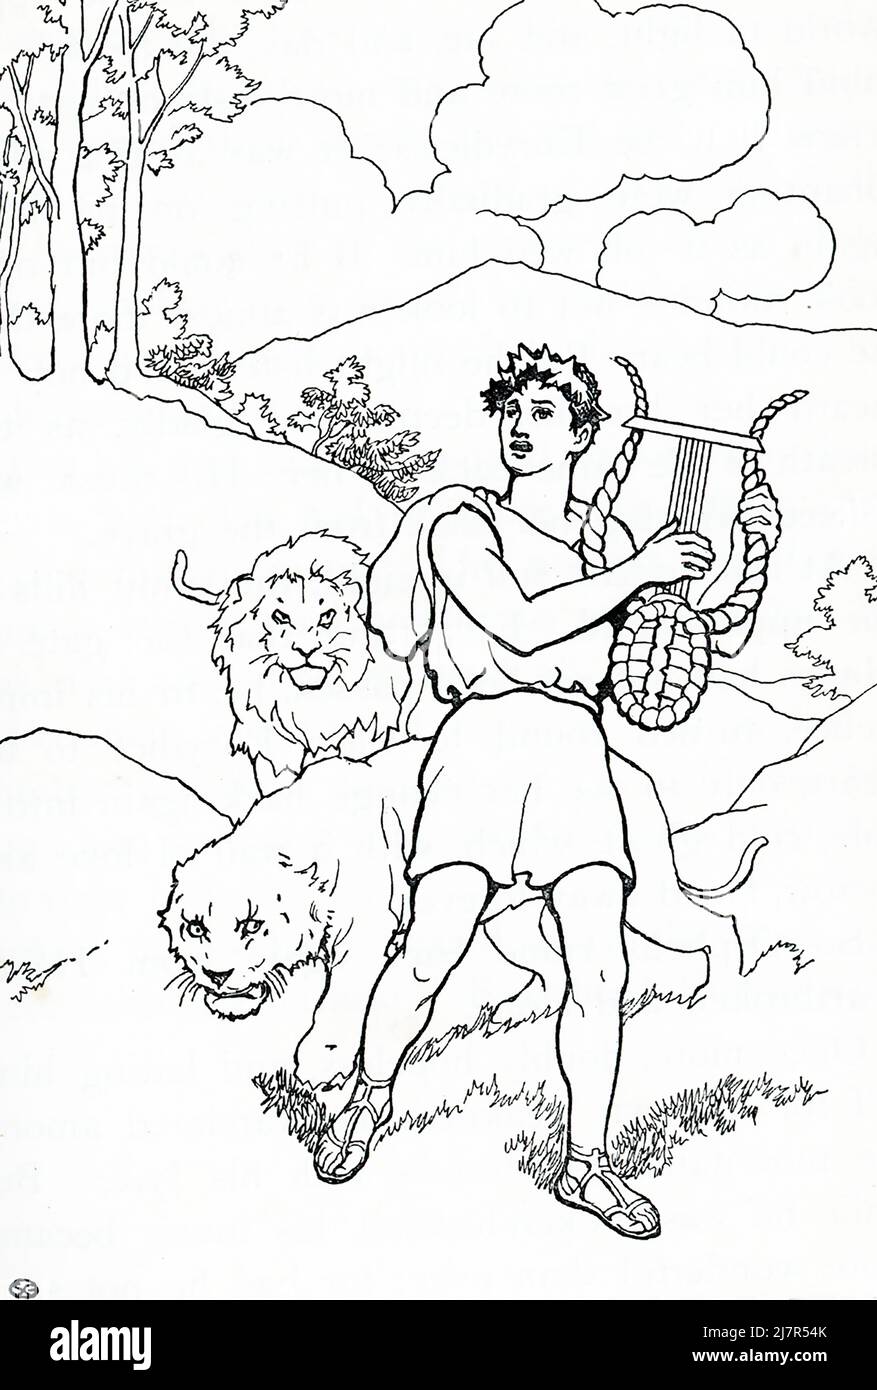 In Greek mythology, Orpheus was a famed Thracian bard whose lyre music charmed even the wildest of animals (seen here) and even plants, trees, and rocks. The son of the Muse Calliope, he married the nymph Eurydice after taking part in the Argonaut expedition. According to Greek mythology, after a snake killed her, Orpheus went to Hades (the Underworld) to fetch her. Charmed by his music, the gods freed her, but on the condition that he not look at her until he reached the upper world. As he neared the upper world, he looked back and, as a result, she vanished from his grasp back to the Underwo Stock Photo